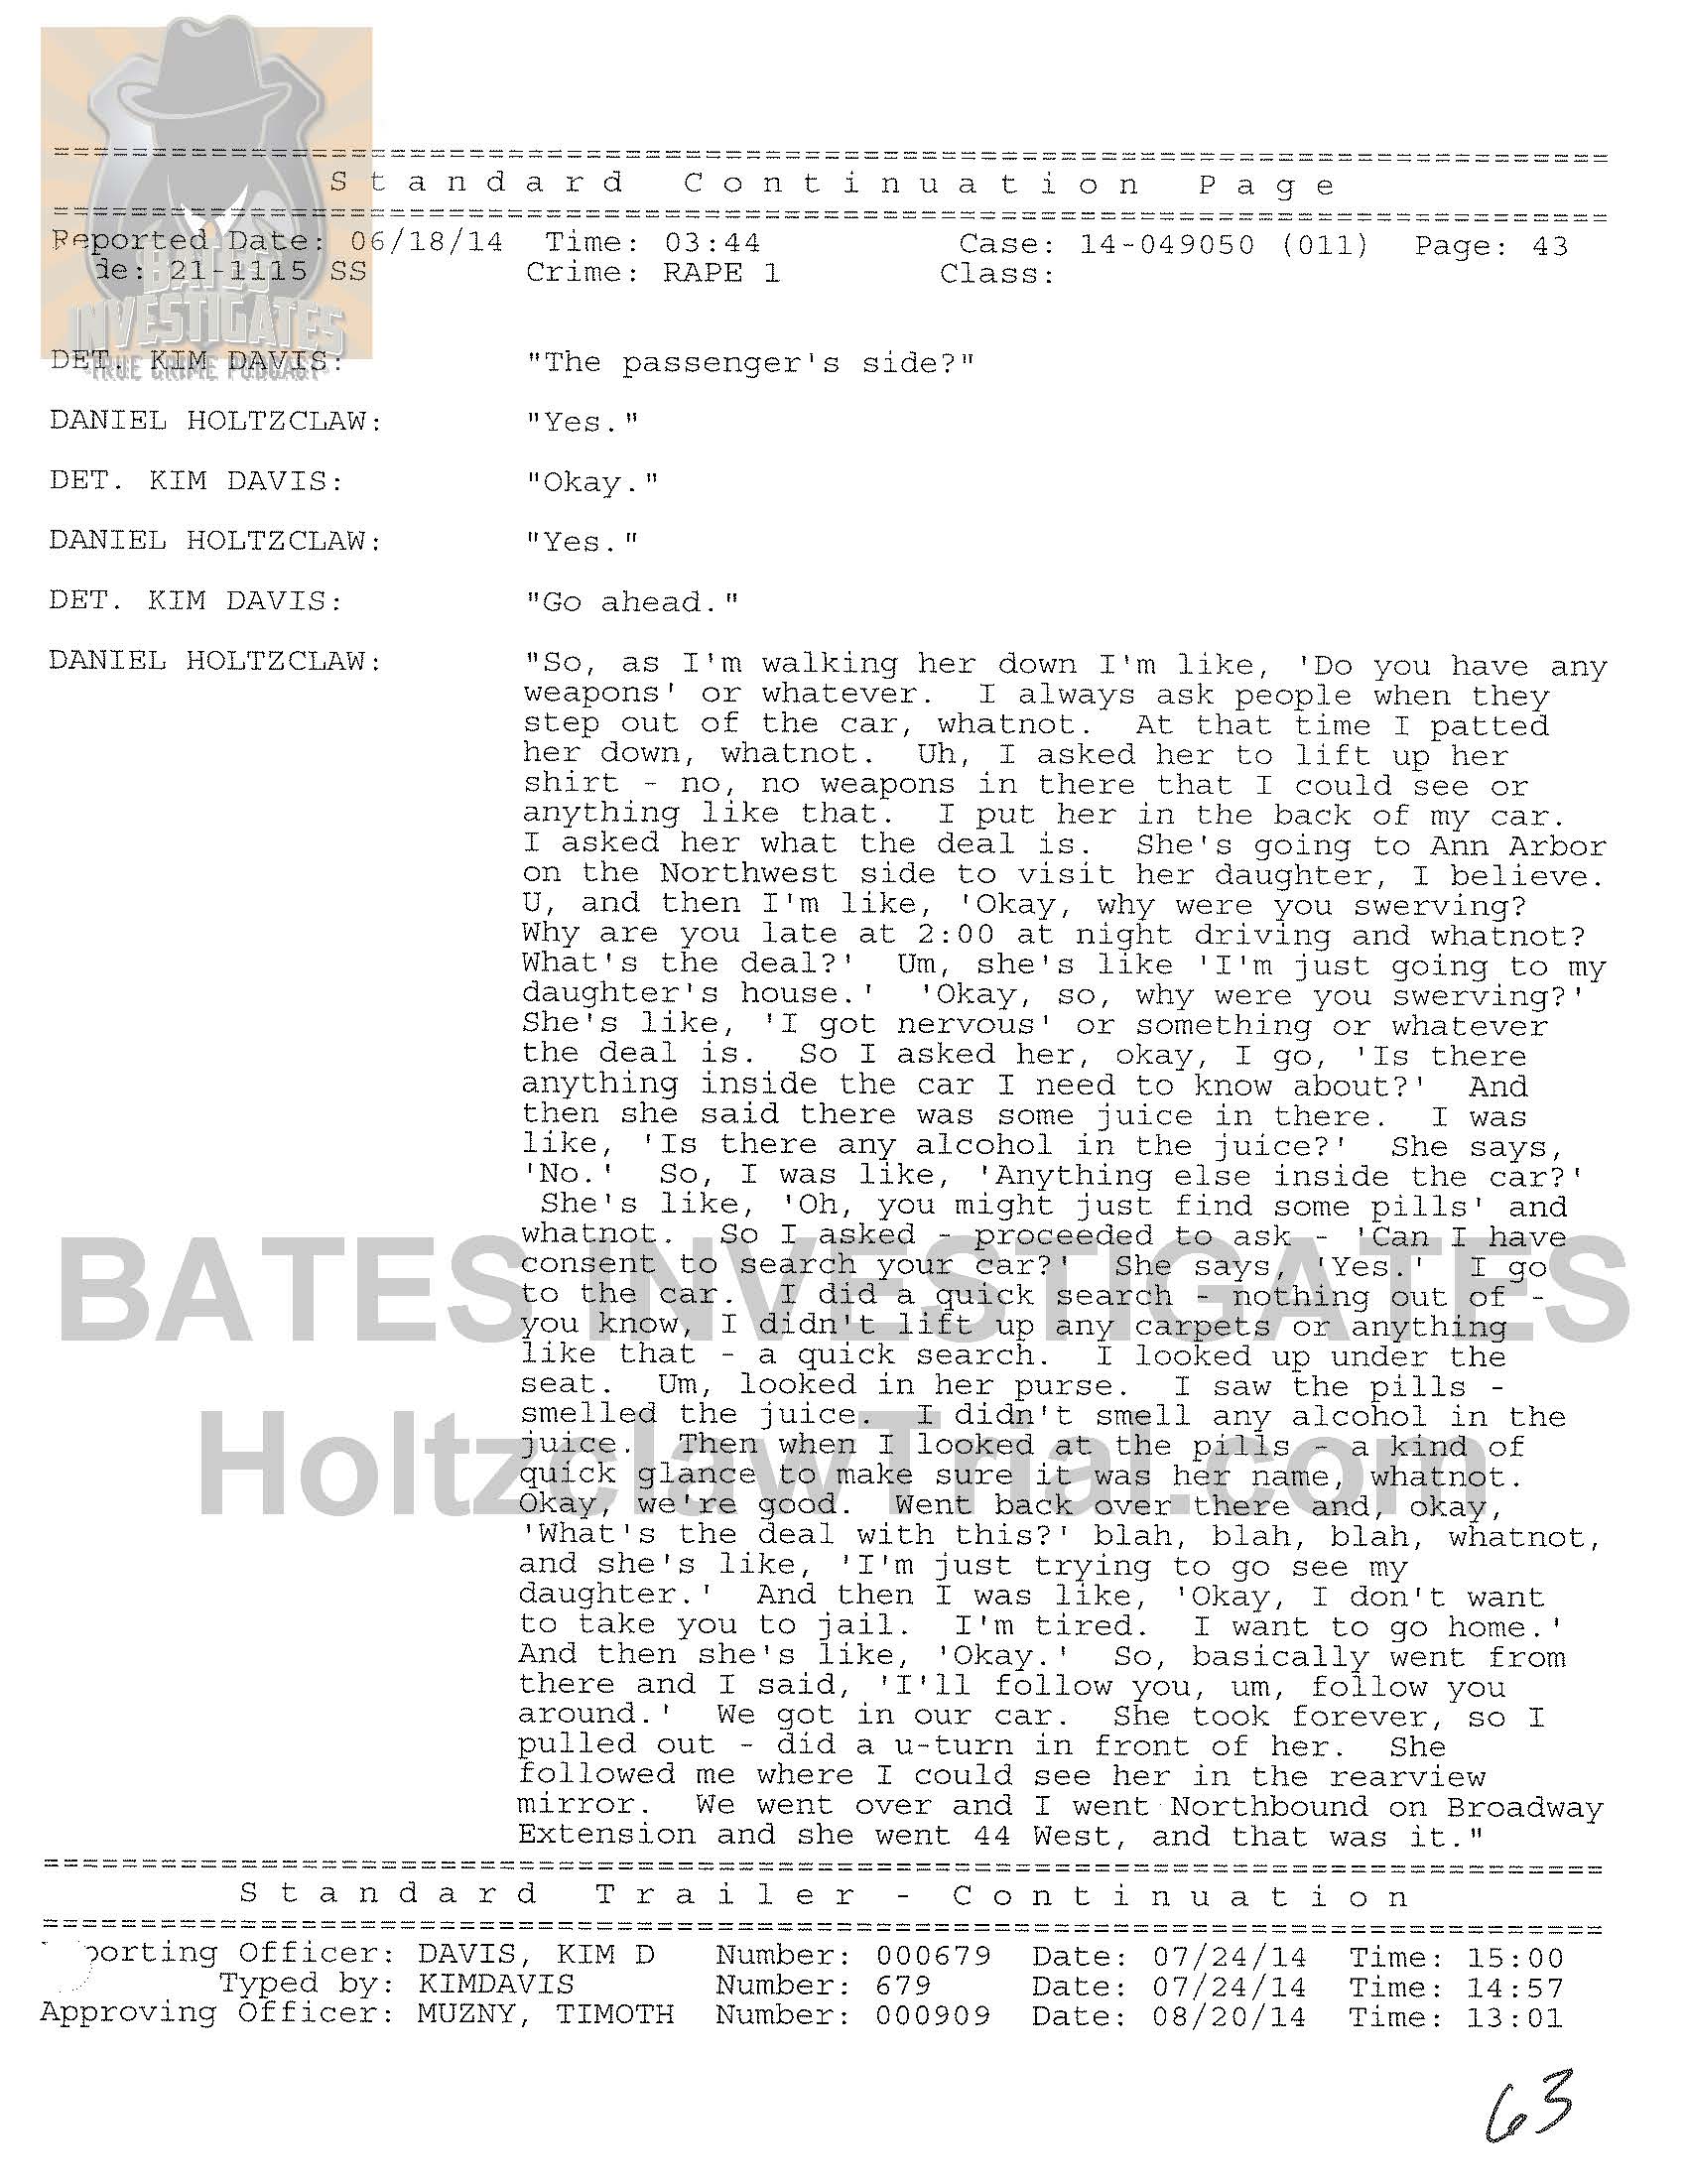 Holtzclaw Interrogation Transcript - Ep02 Redacted_Page_43.jpg